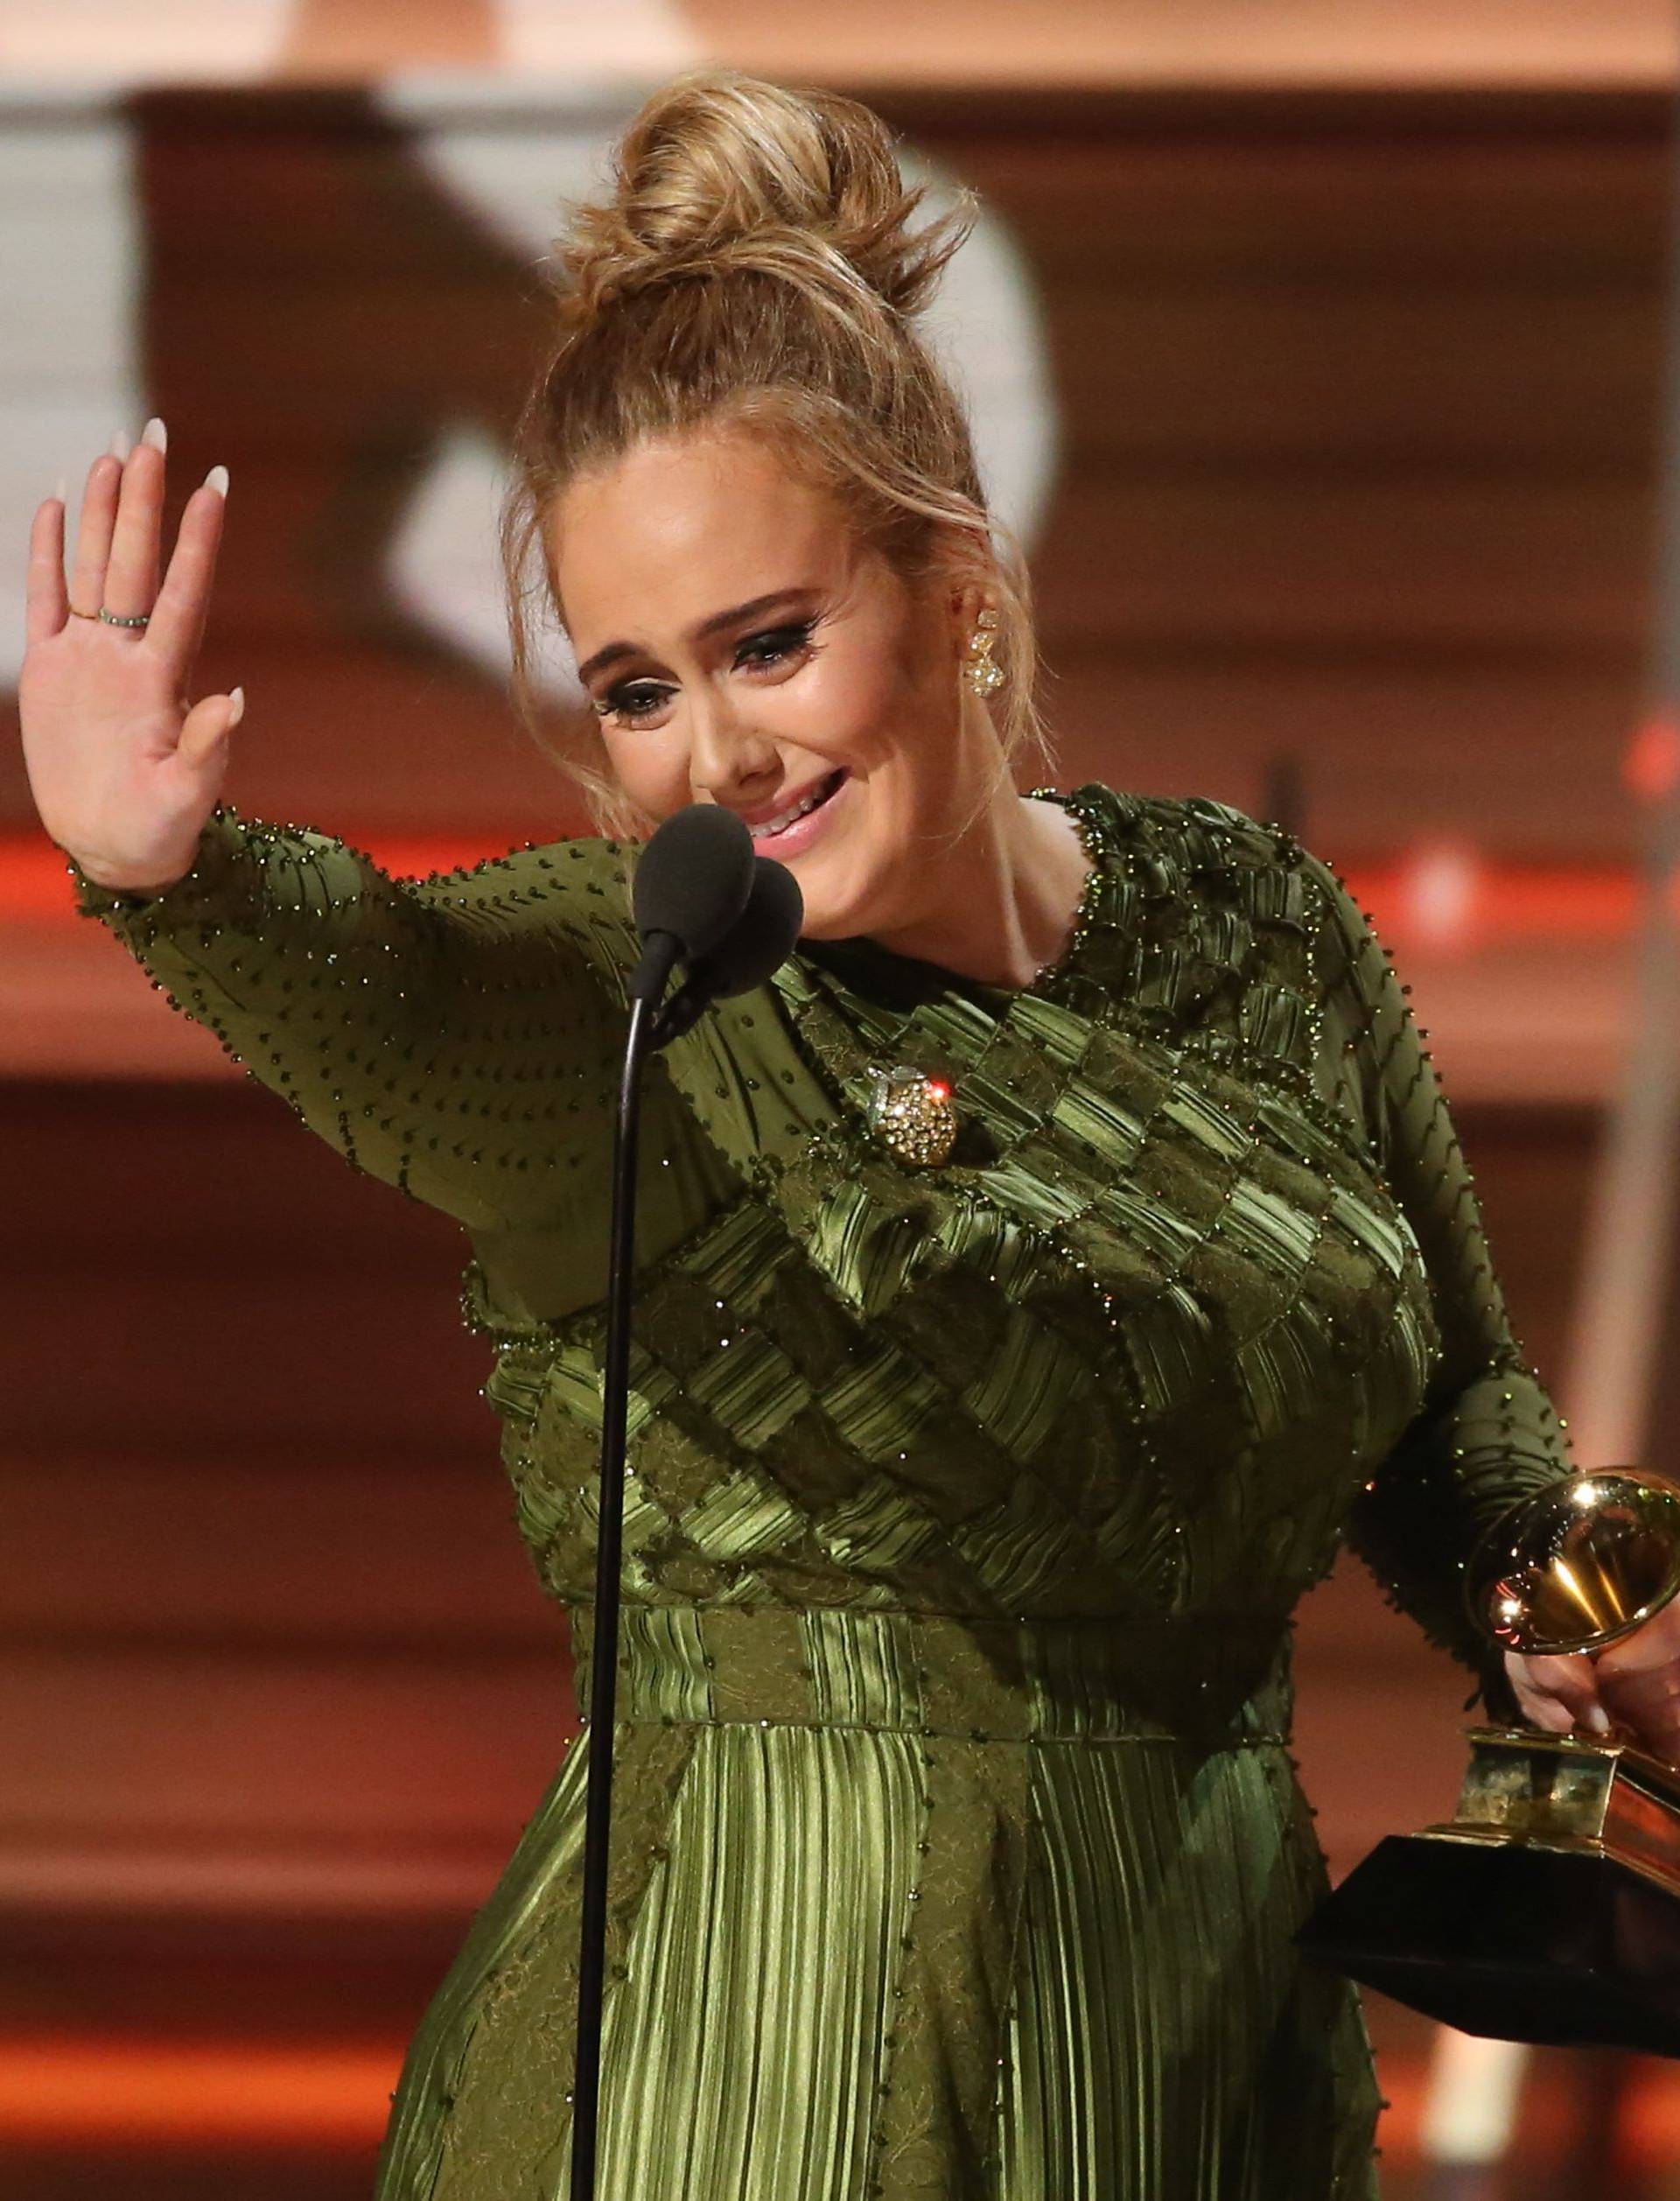 Adele and co-song writer Kurstin accept the Grammy for Song of the Year for "Hello" at the 59th Annual Grammy Awards in Los Angeles